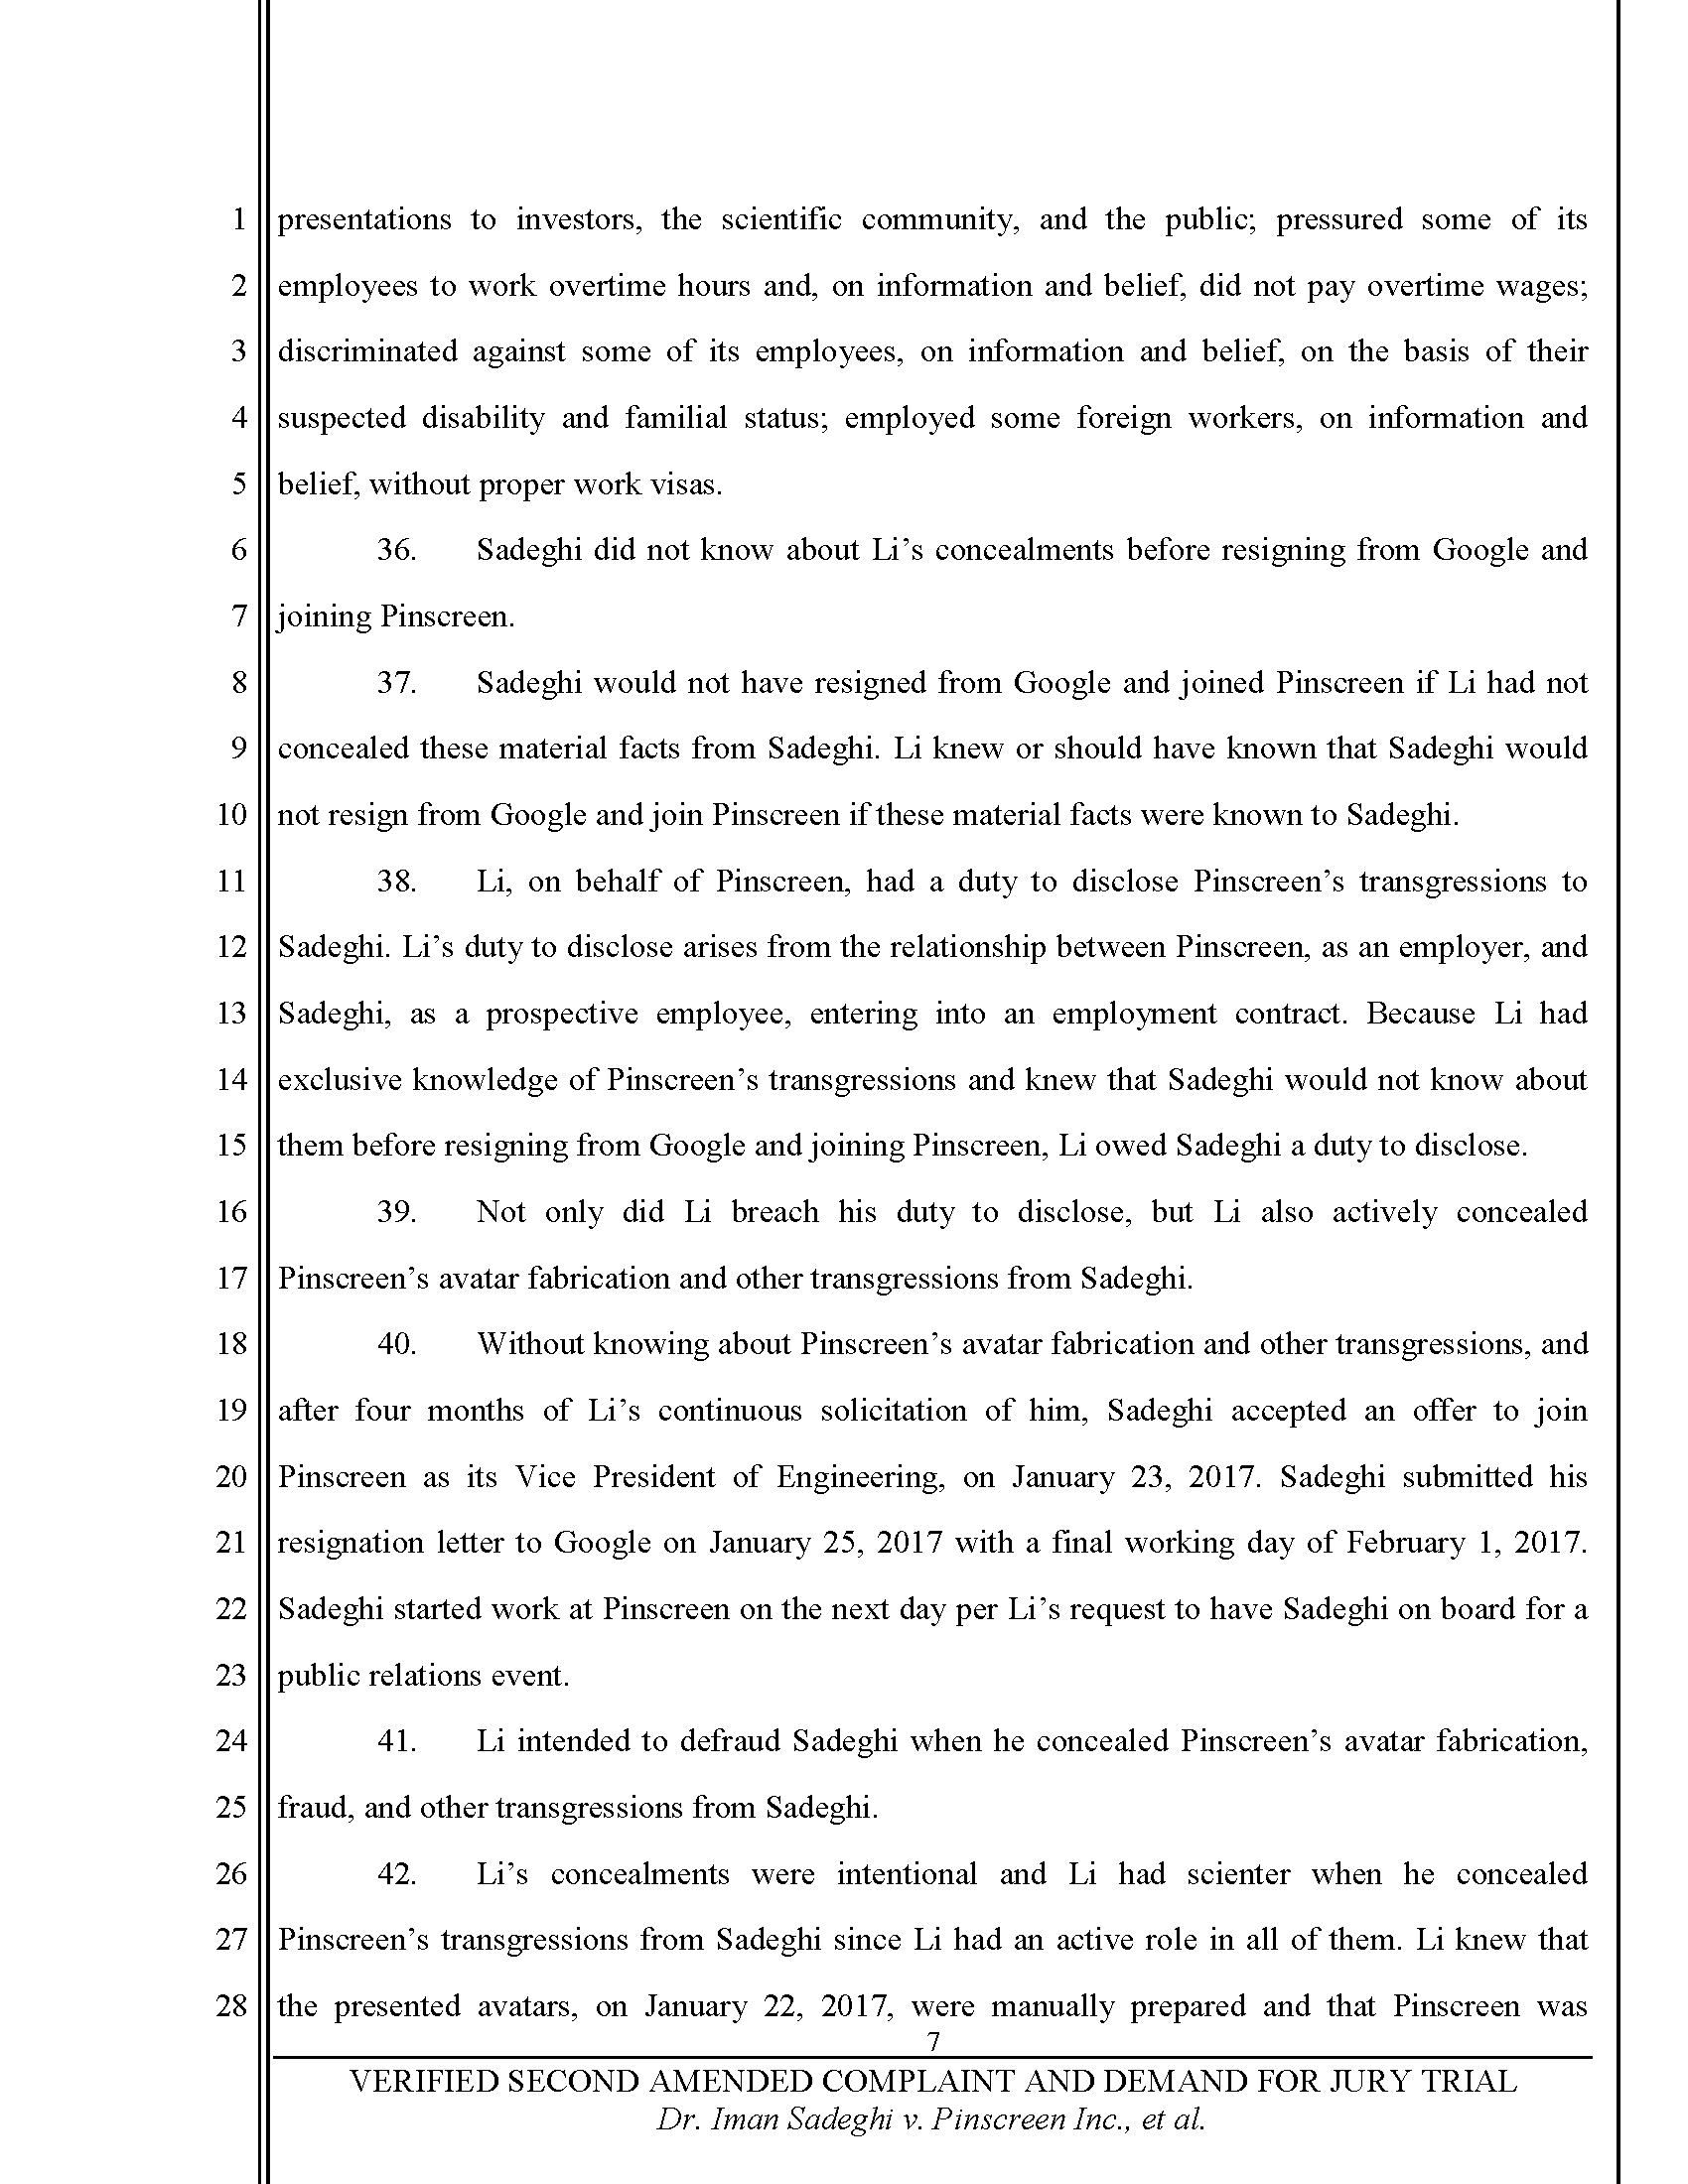 Second Amended Complaint (SAC) Page 8